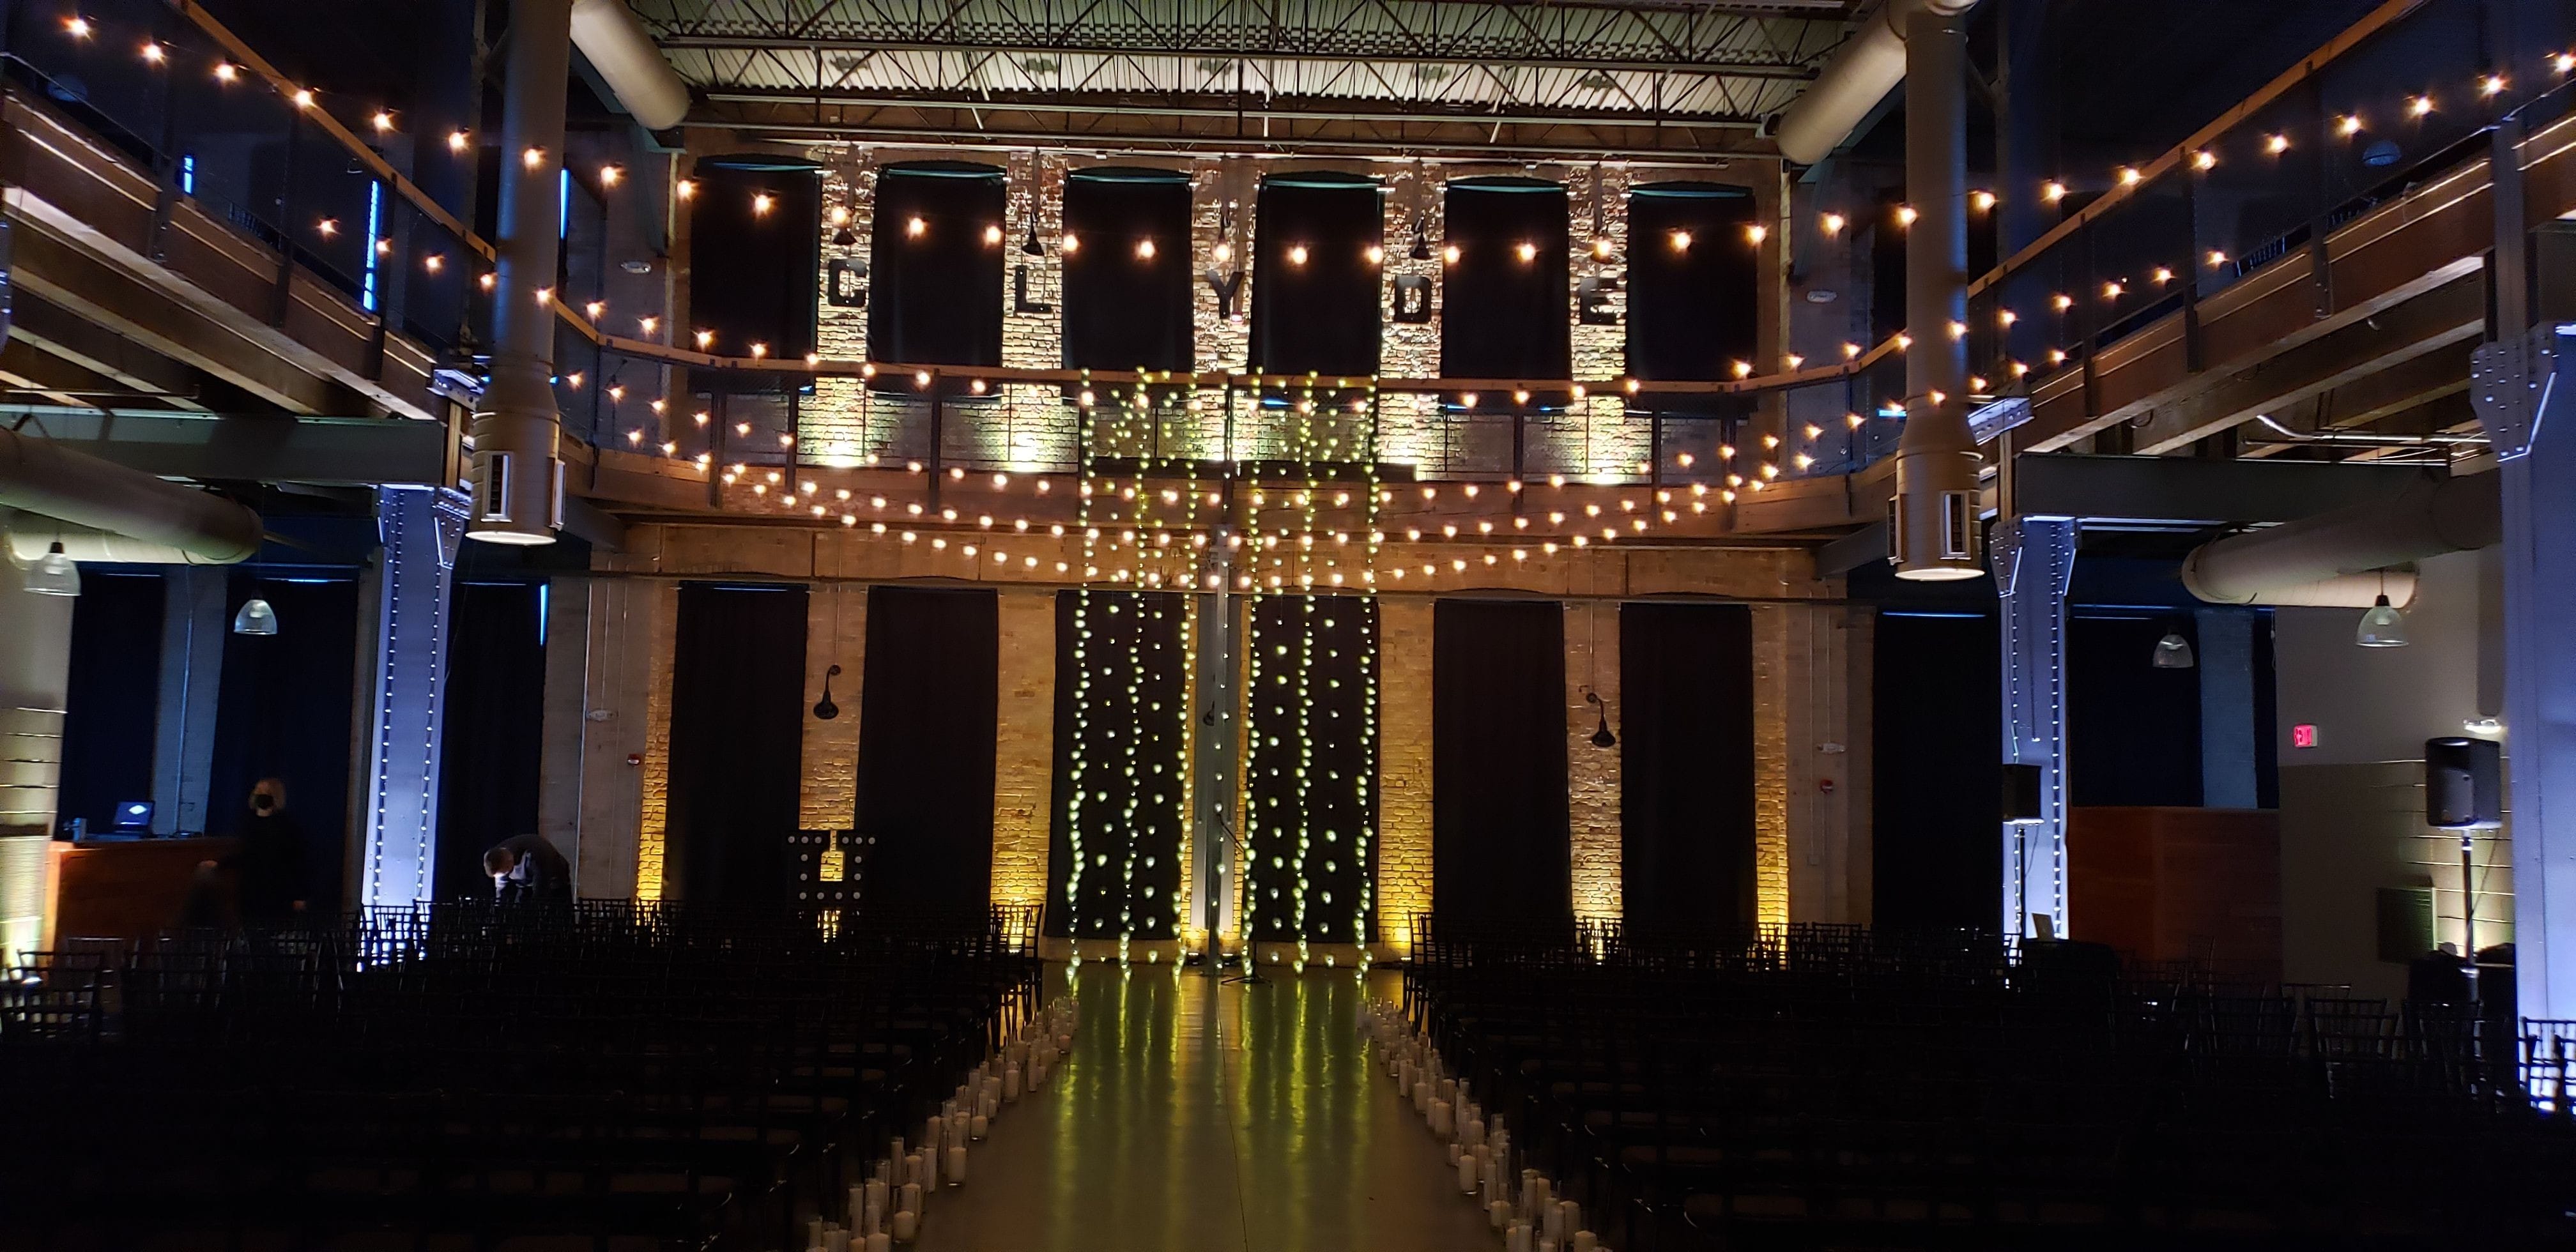 Wedding lighting at Clyde Iron Works with a bistro backdrop over the balcony.